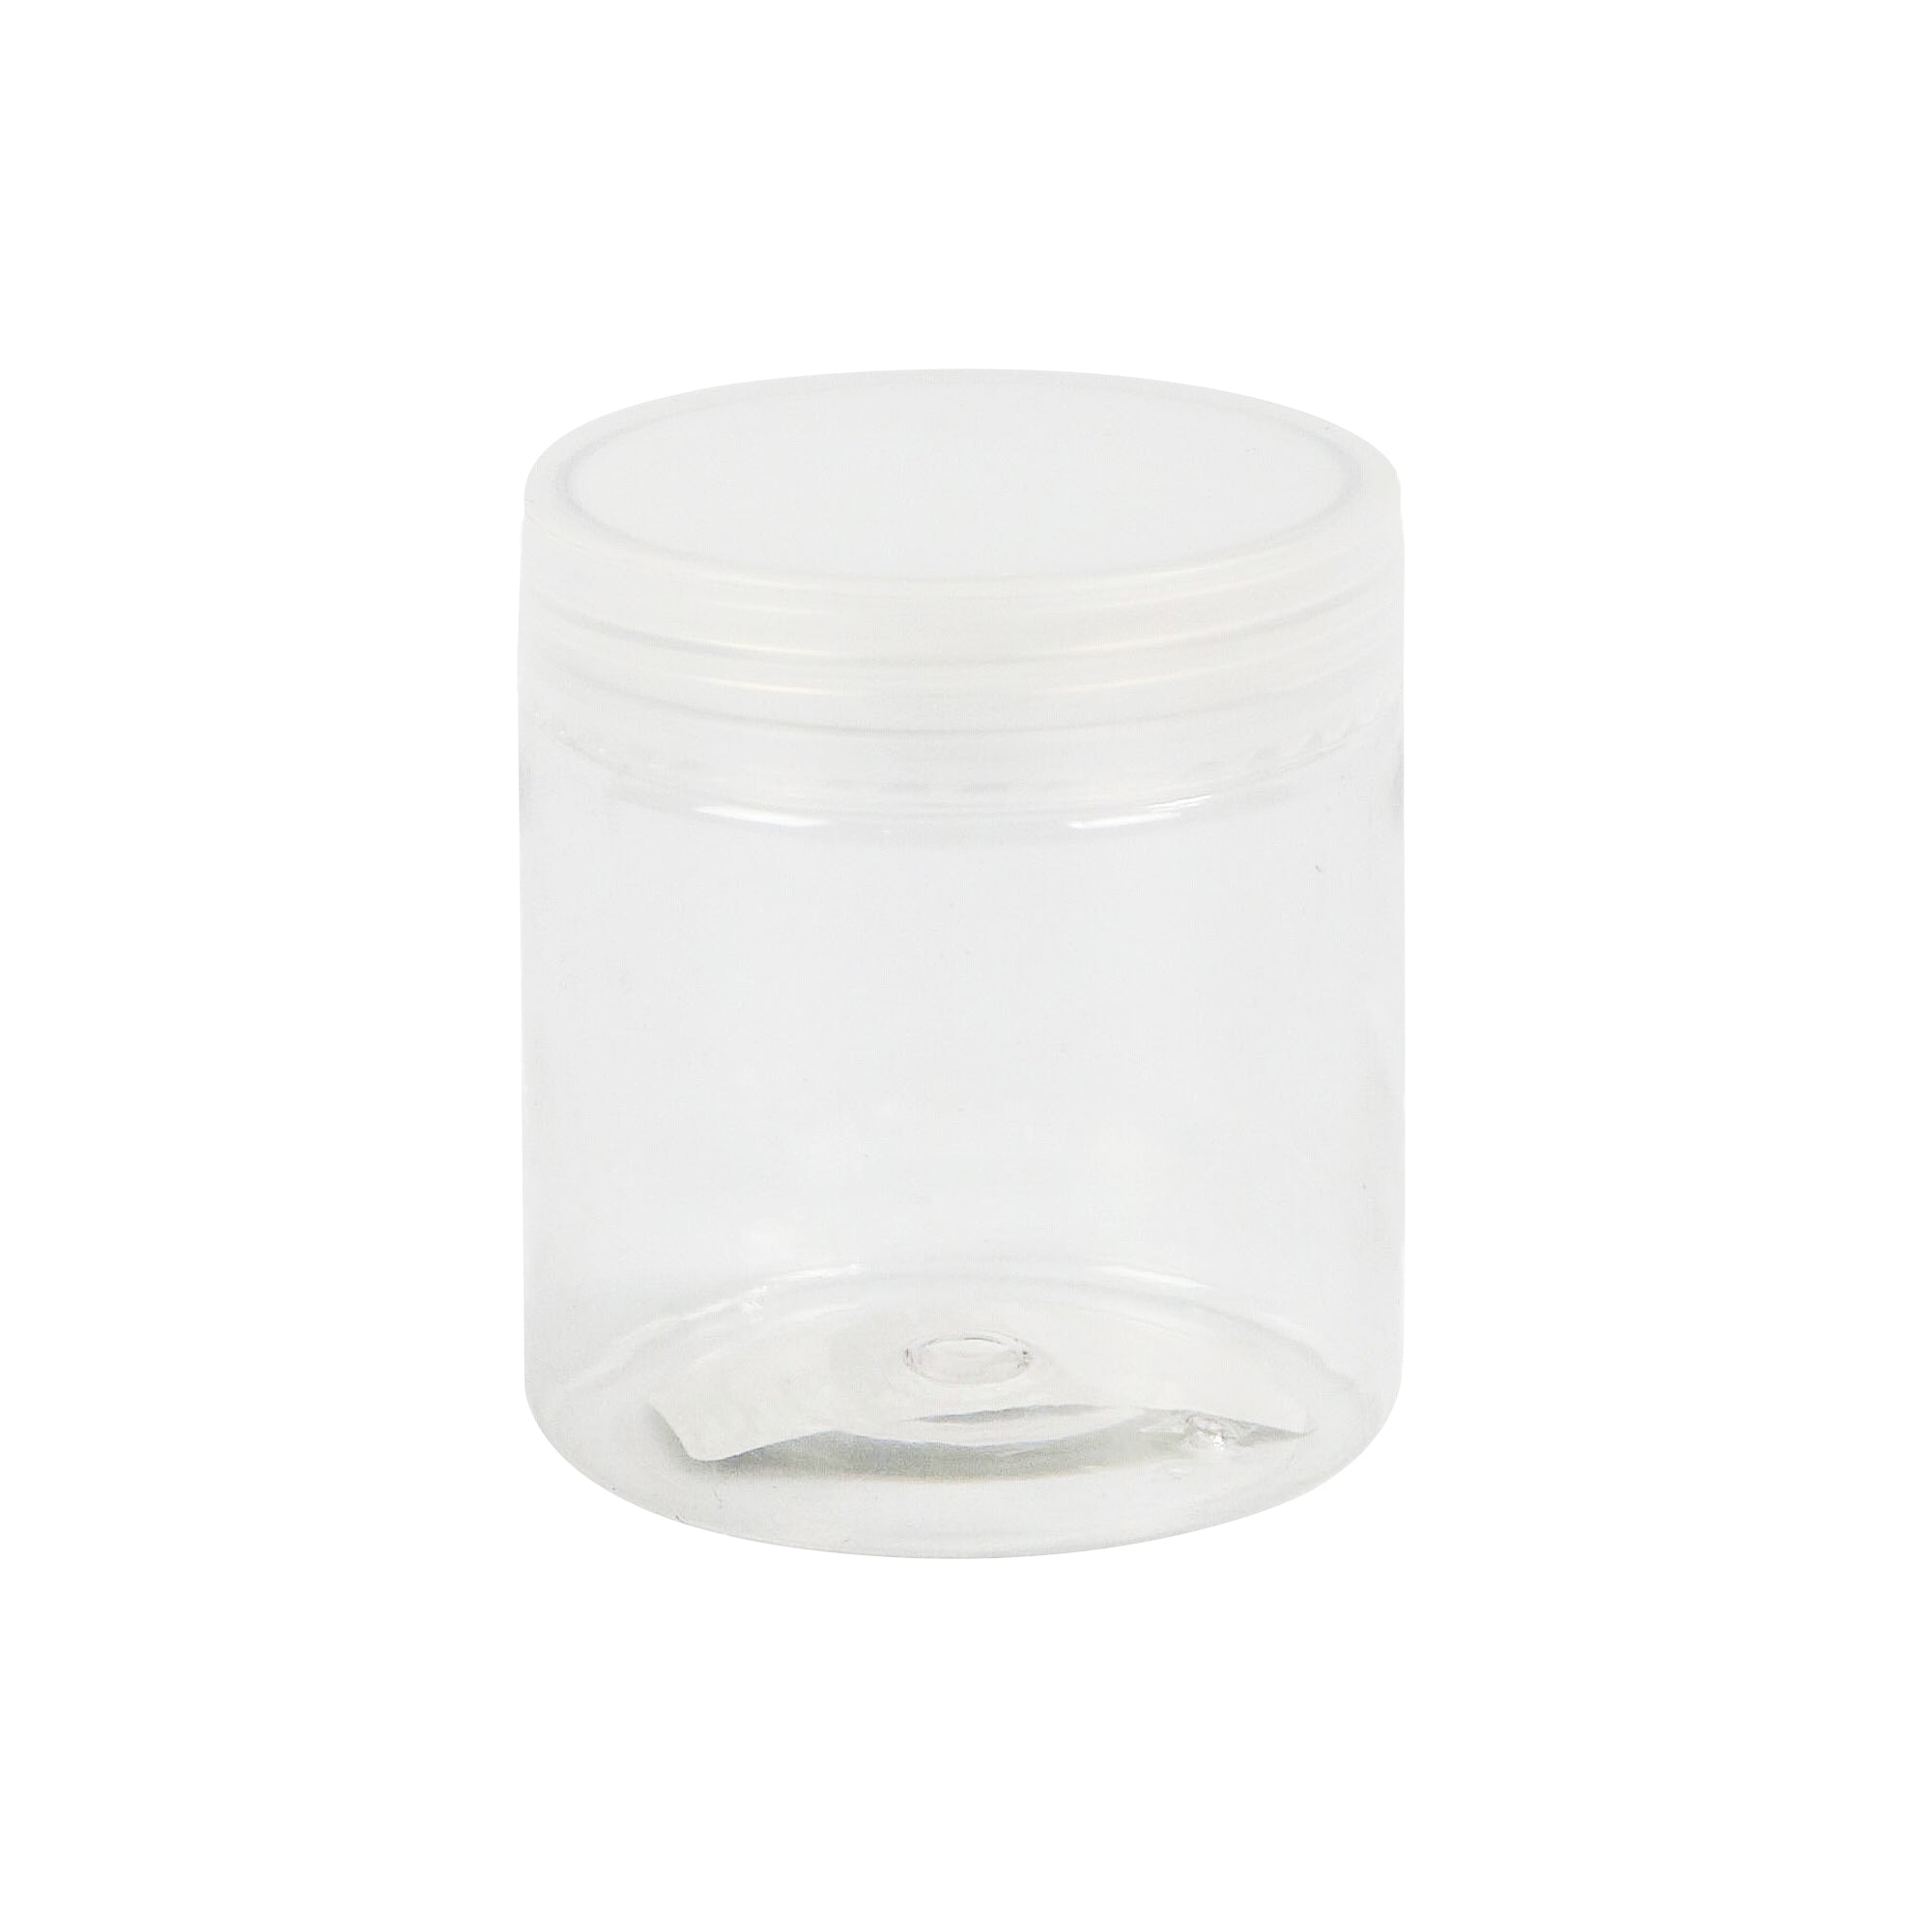 200ml PET Plastic Cosmetic Jar Bottle with Clear Lid WDP200